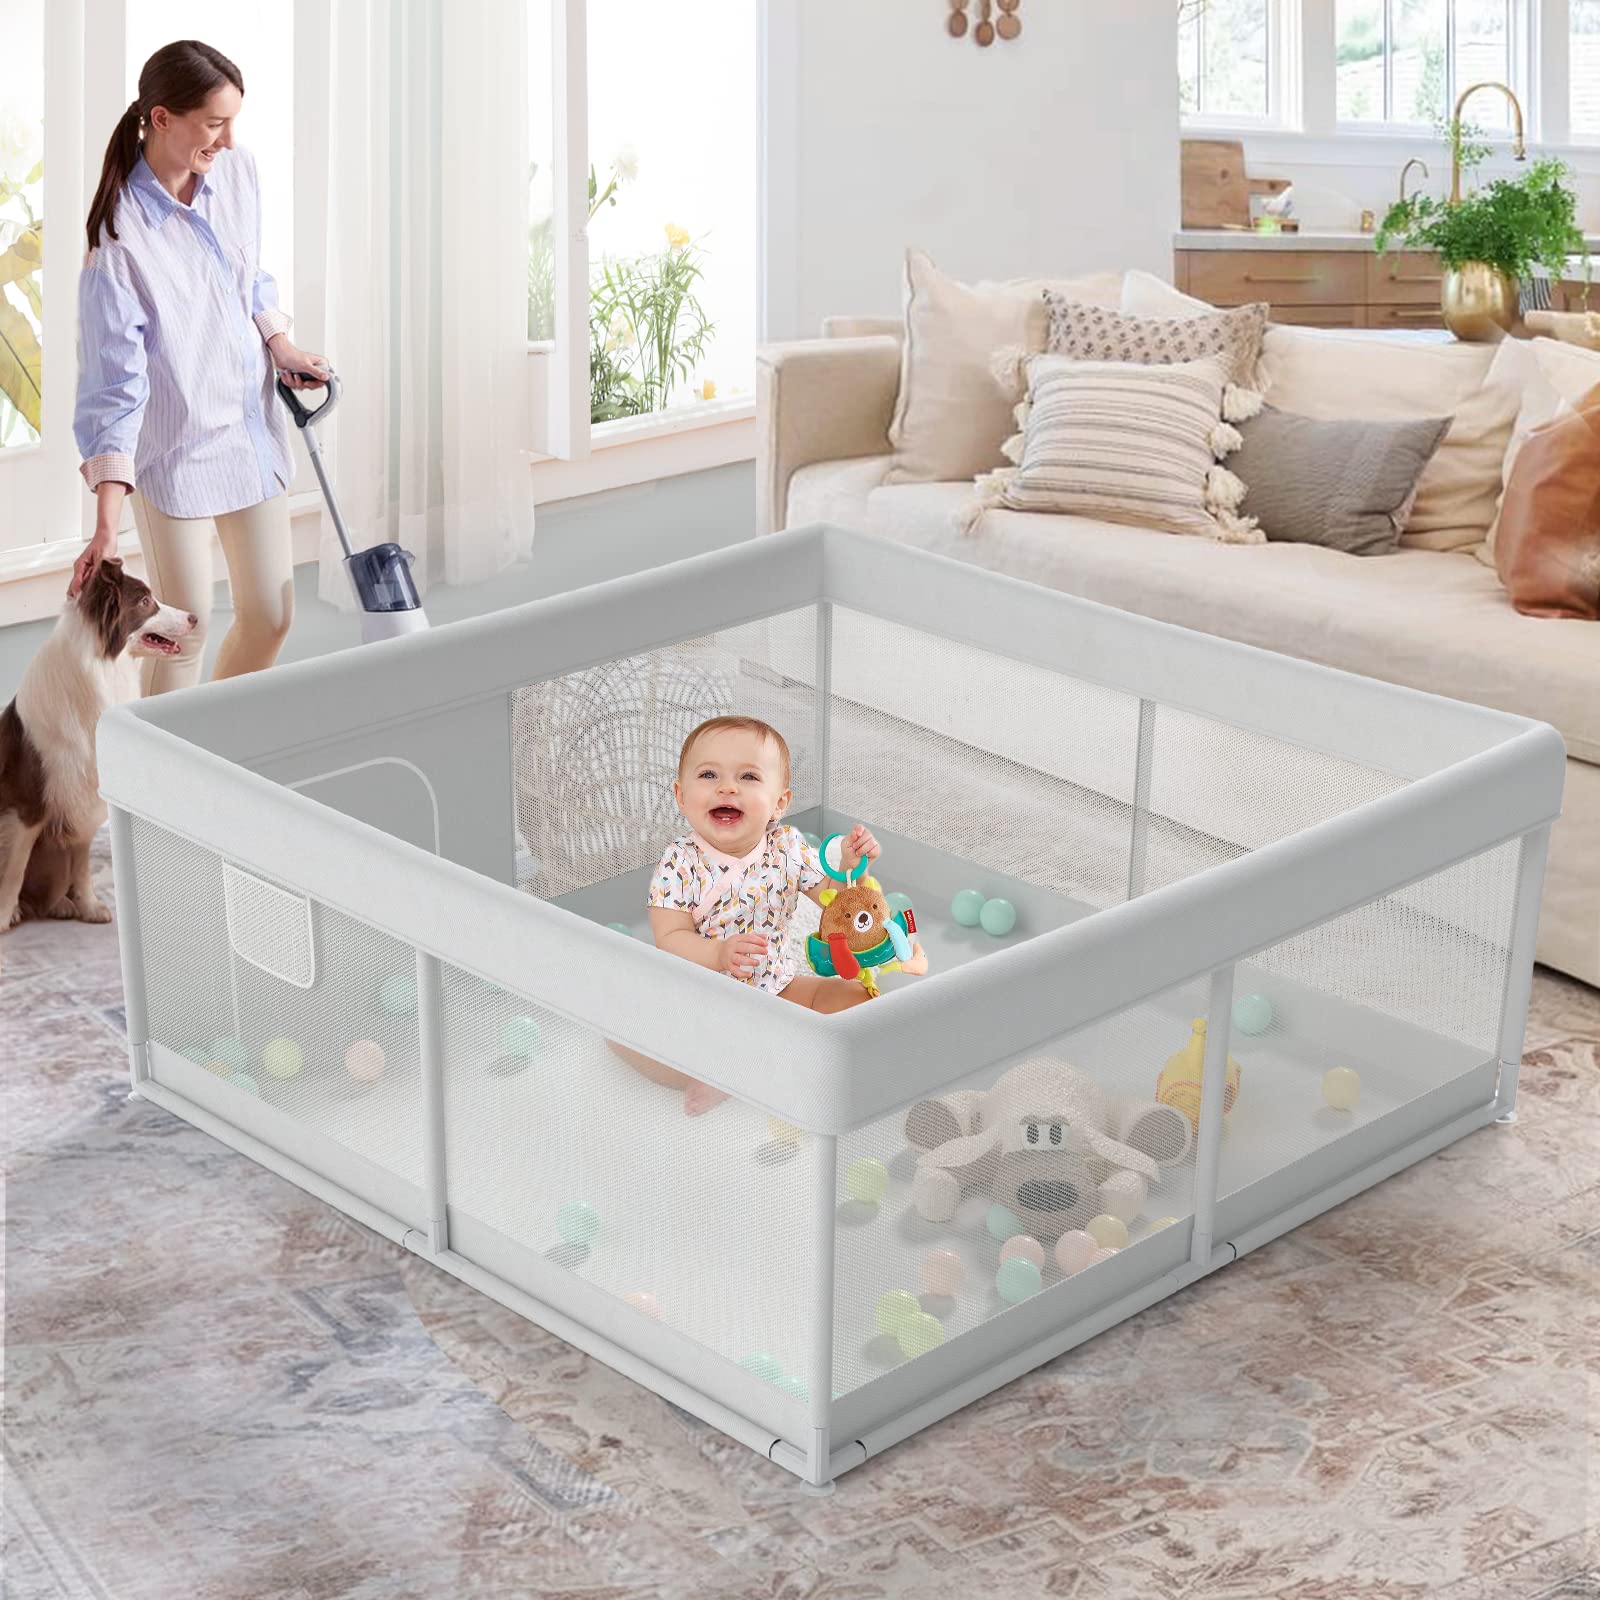 Fodoss Baby Playpen, Playpen for Babies & Toddlers, 47x47 Small Baby Play Pen,Toddler Playpen for Apartment,Play Yard for Baby,Baby Activity Play Fence, Extra Large Baby Playard, 47x47 Light Grey